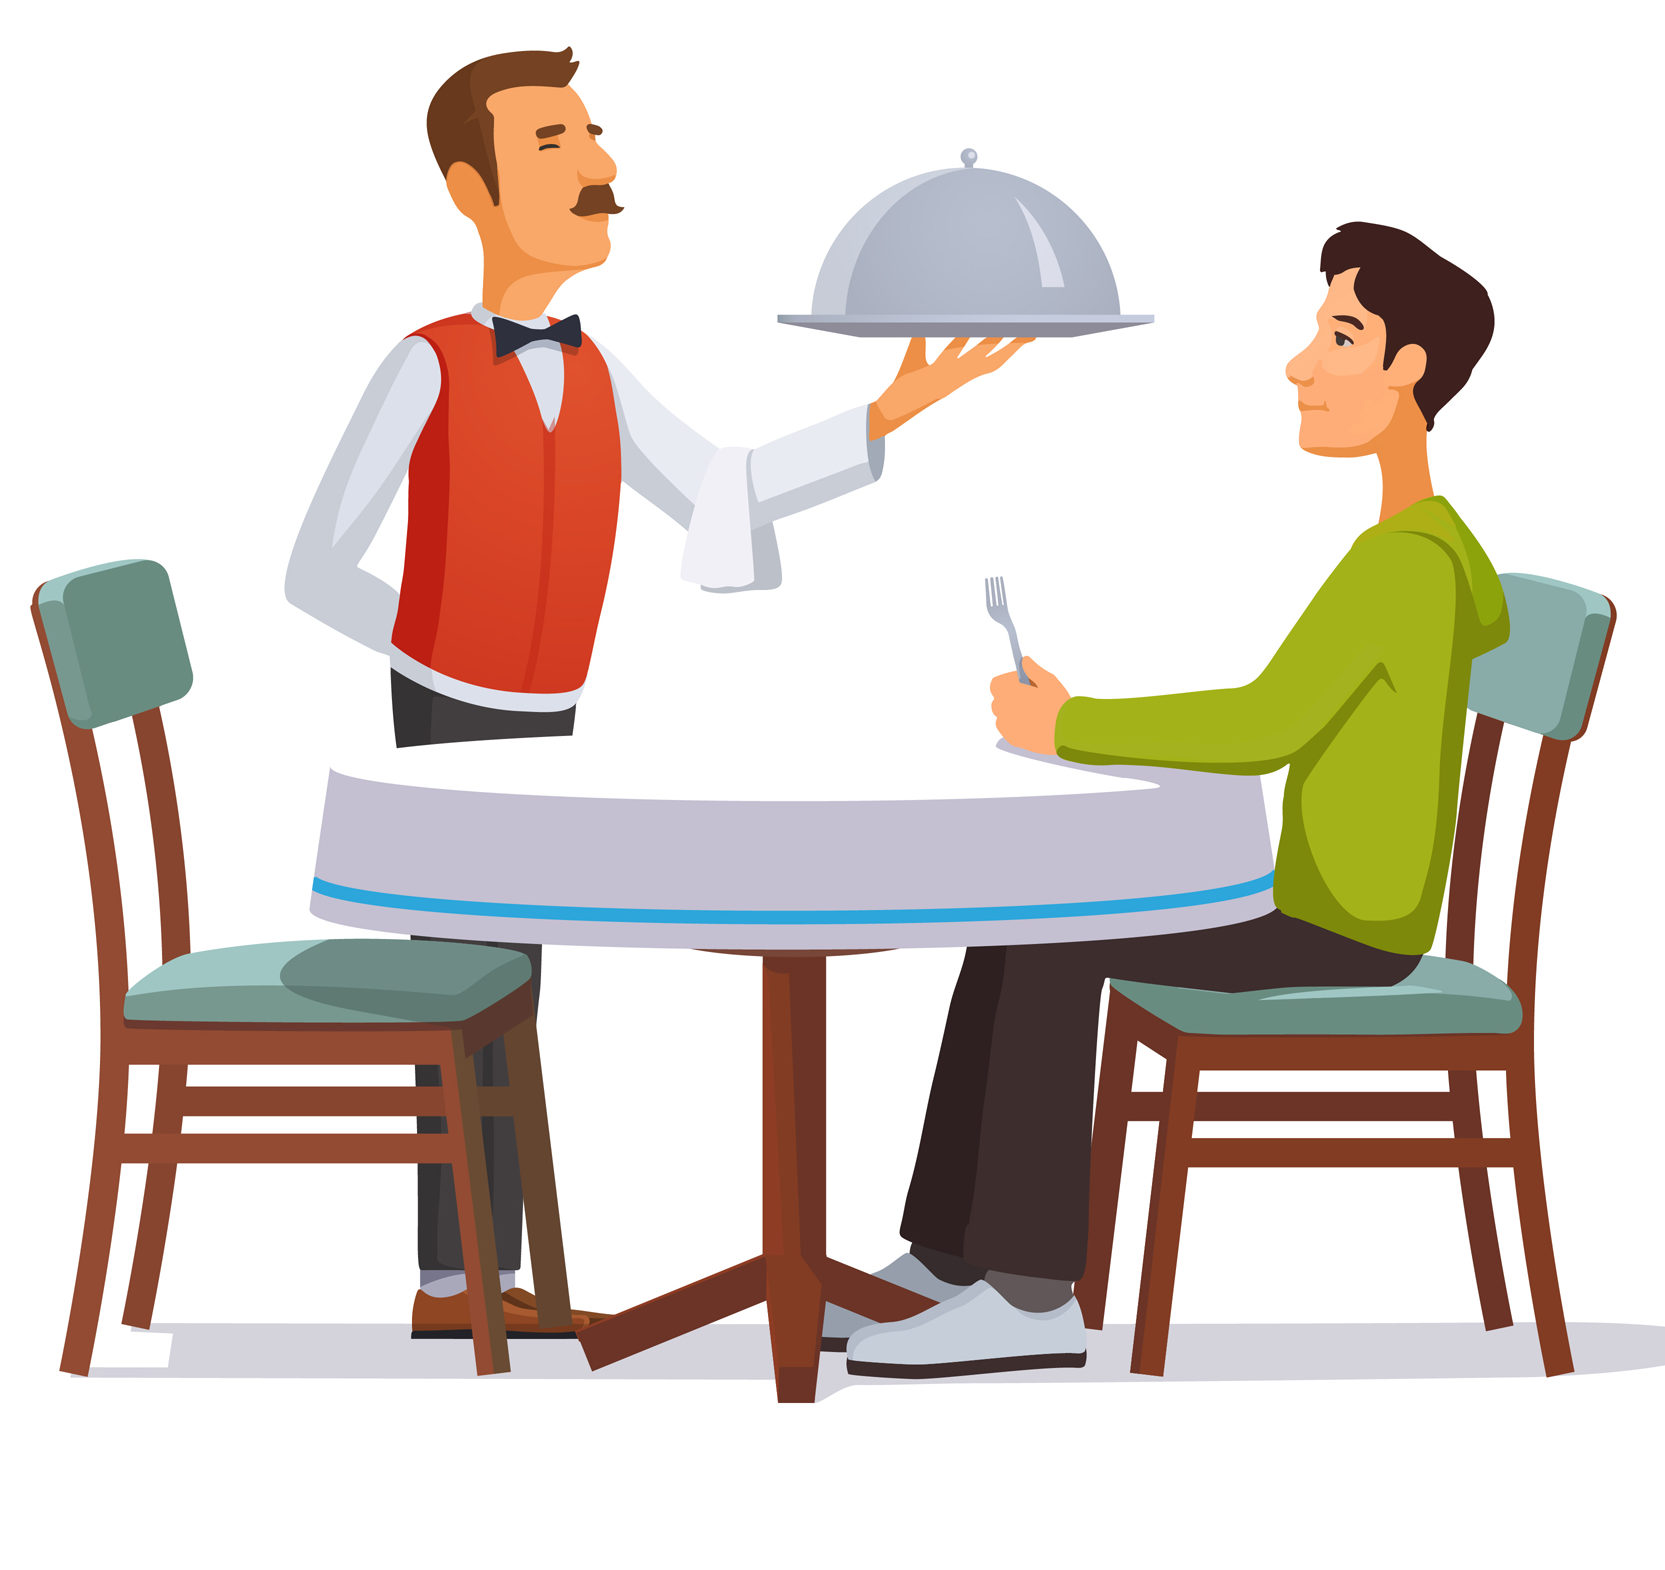 Waiter serving a silver dish with lid to a customer. Flat style illustration or icon. EPS 10 vector.